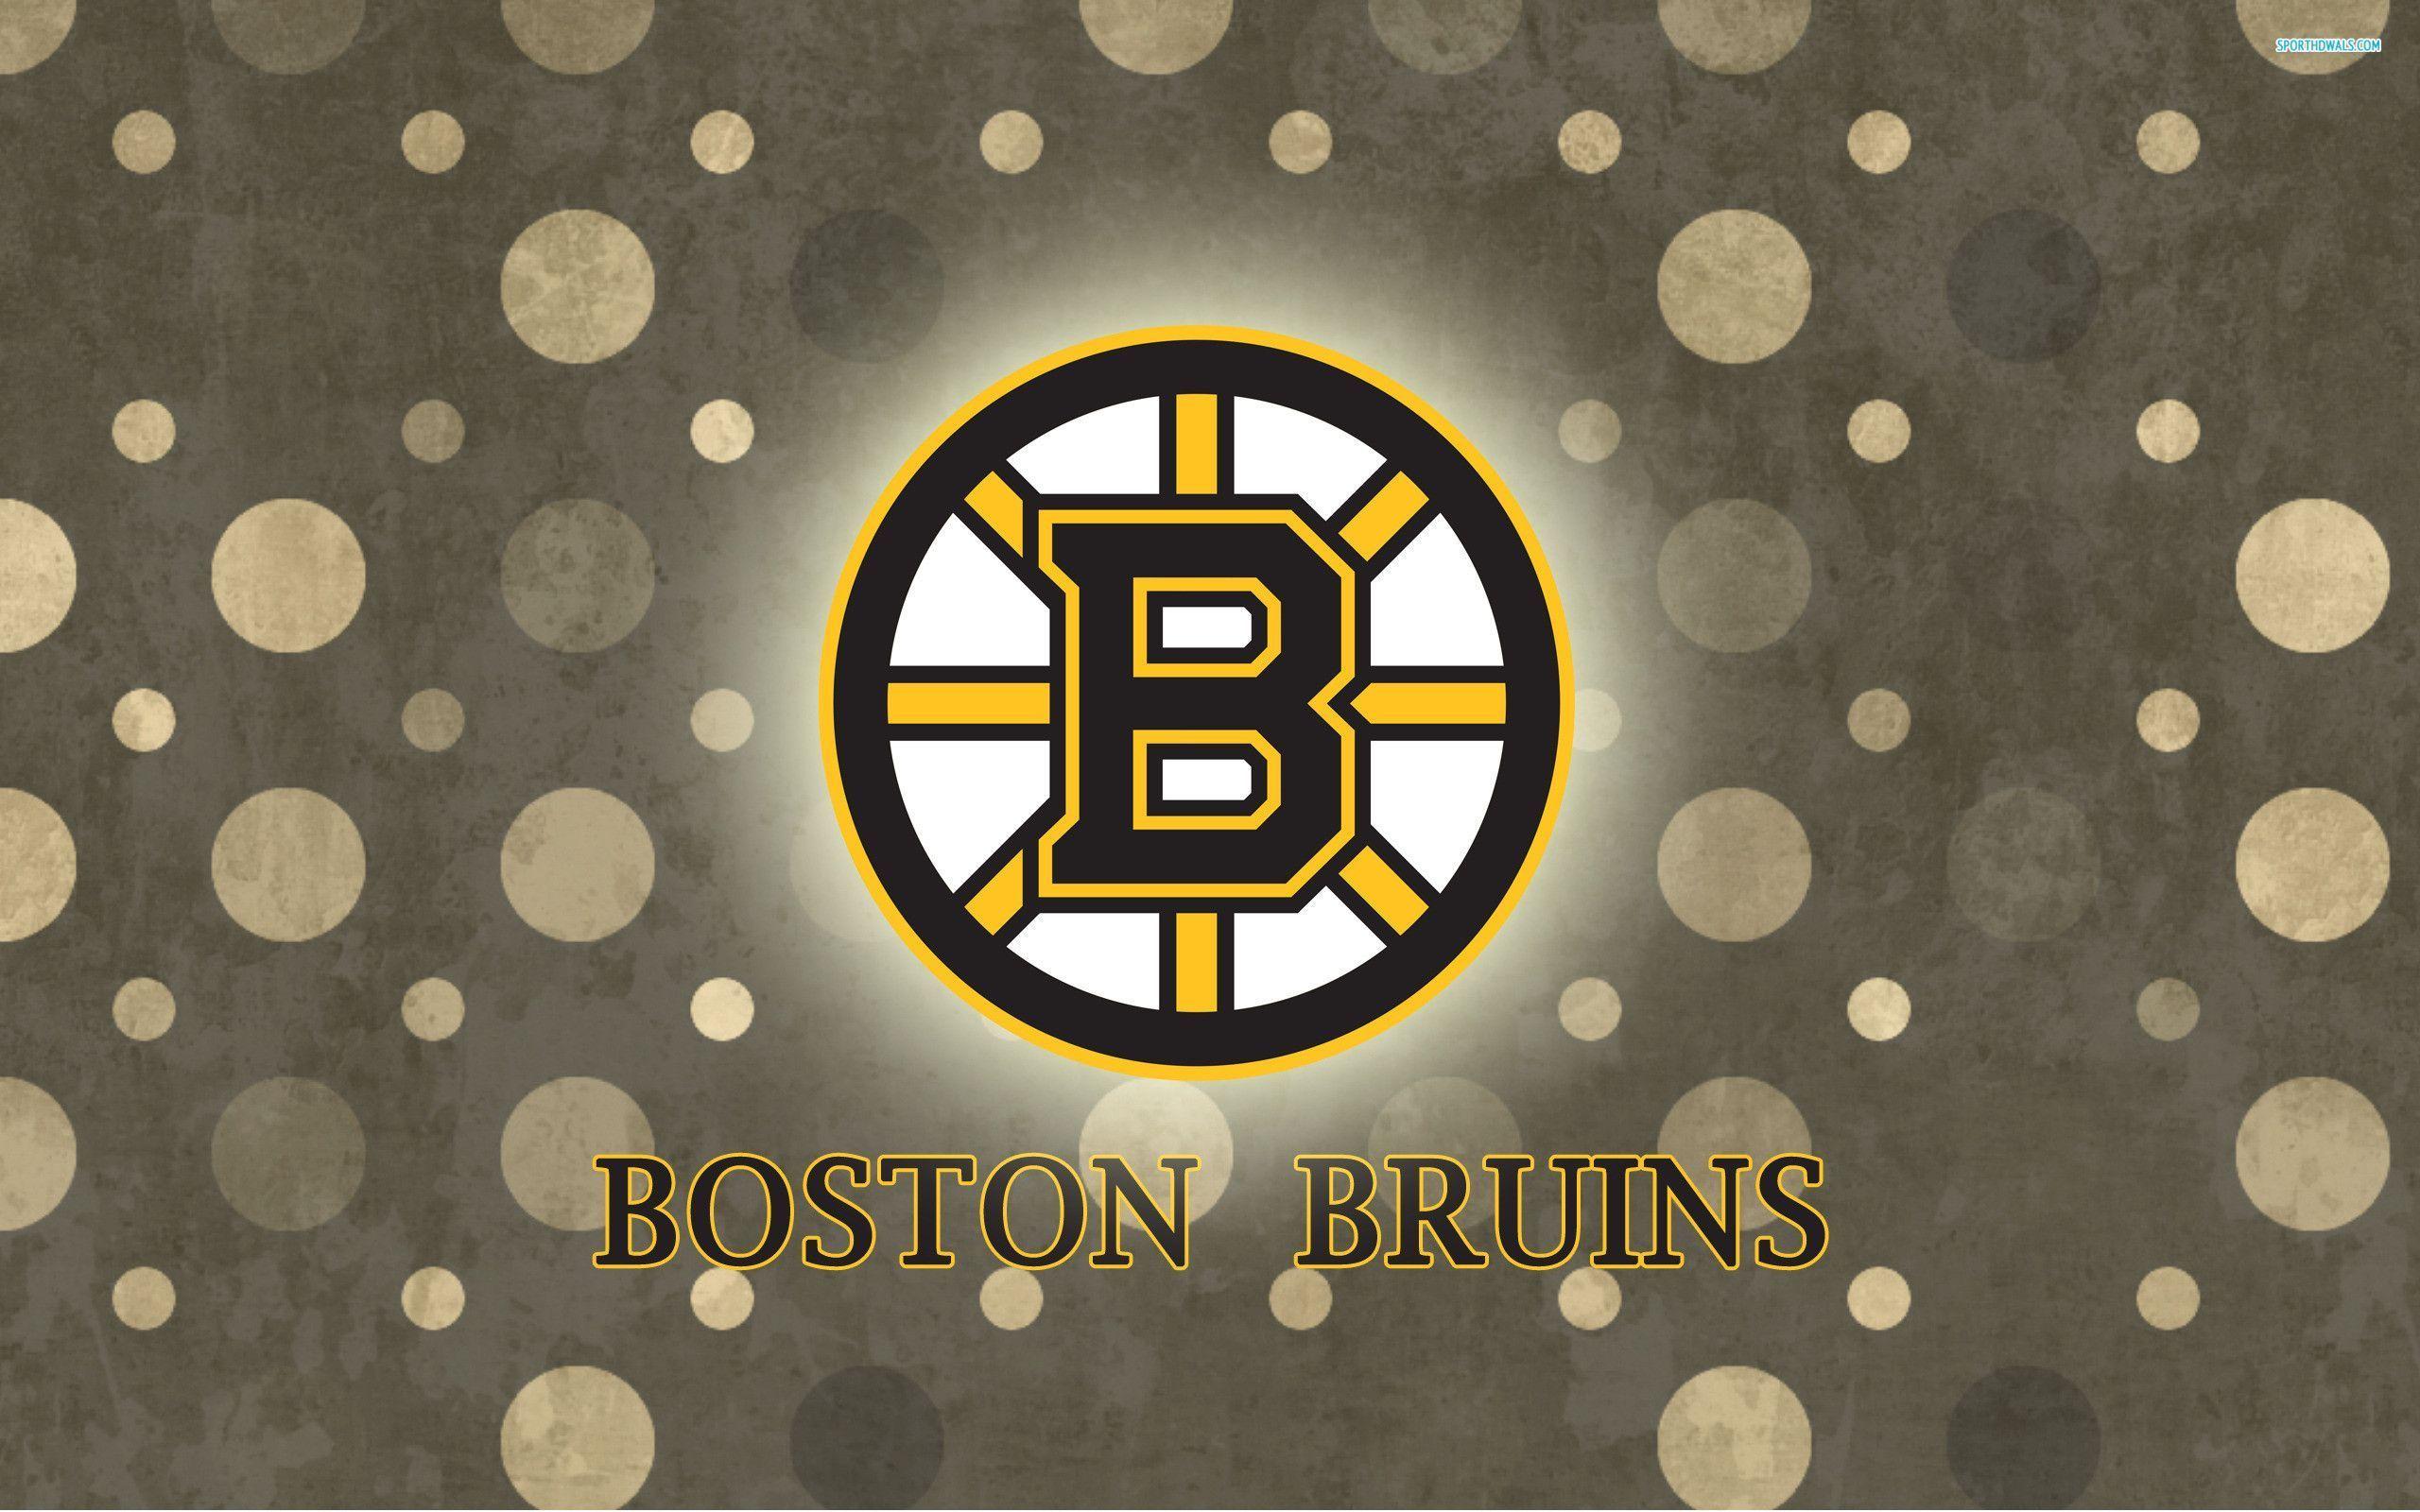 Check this out! our new Boston Bruins wallpaper. Boston Bruins